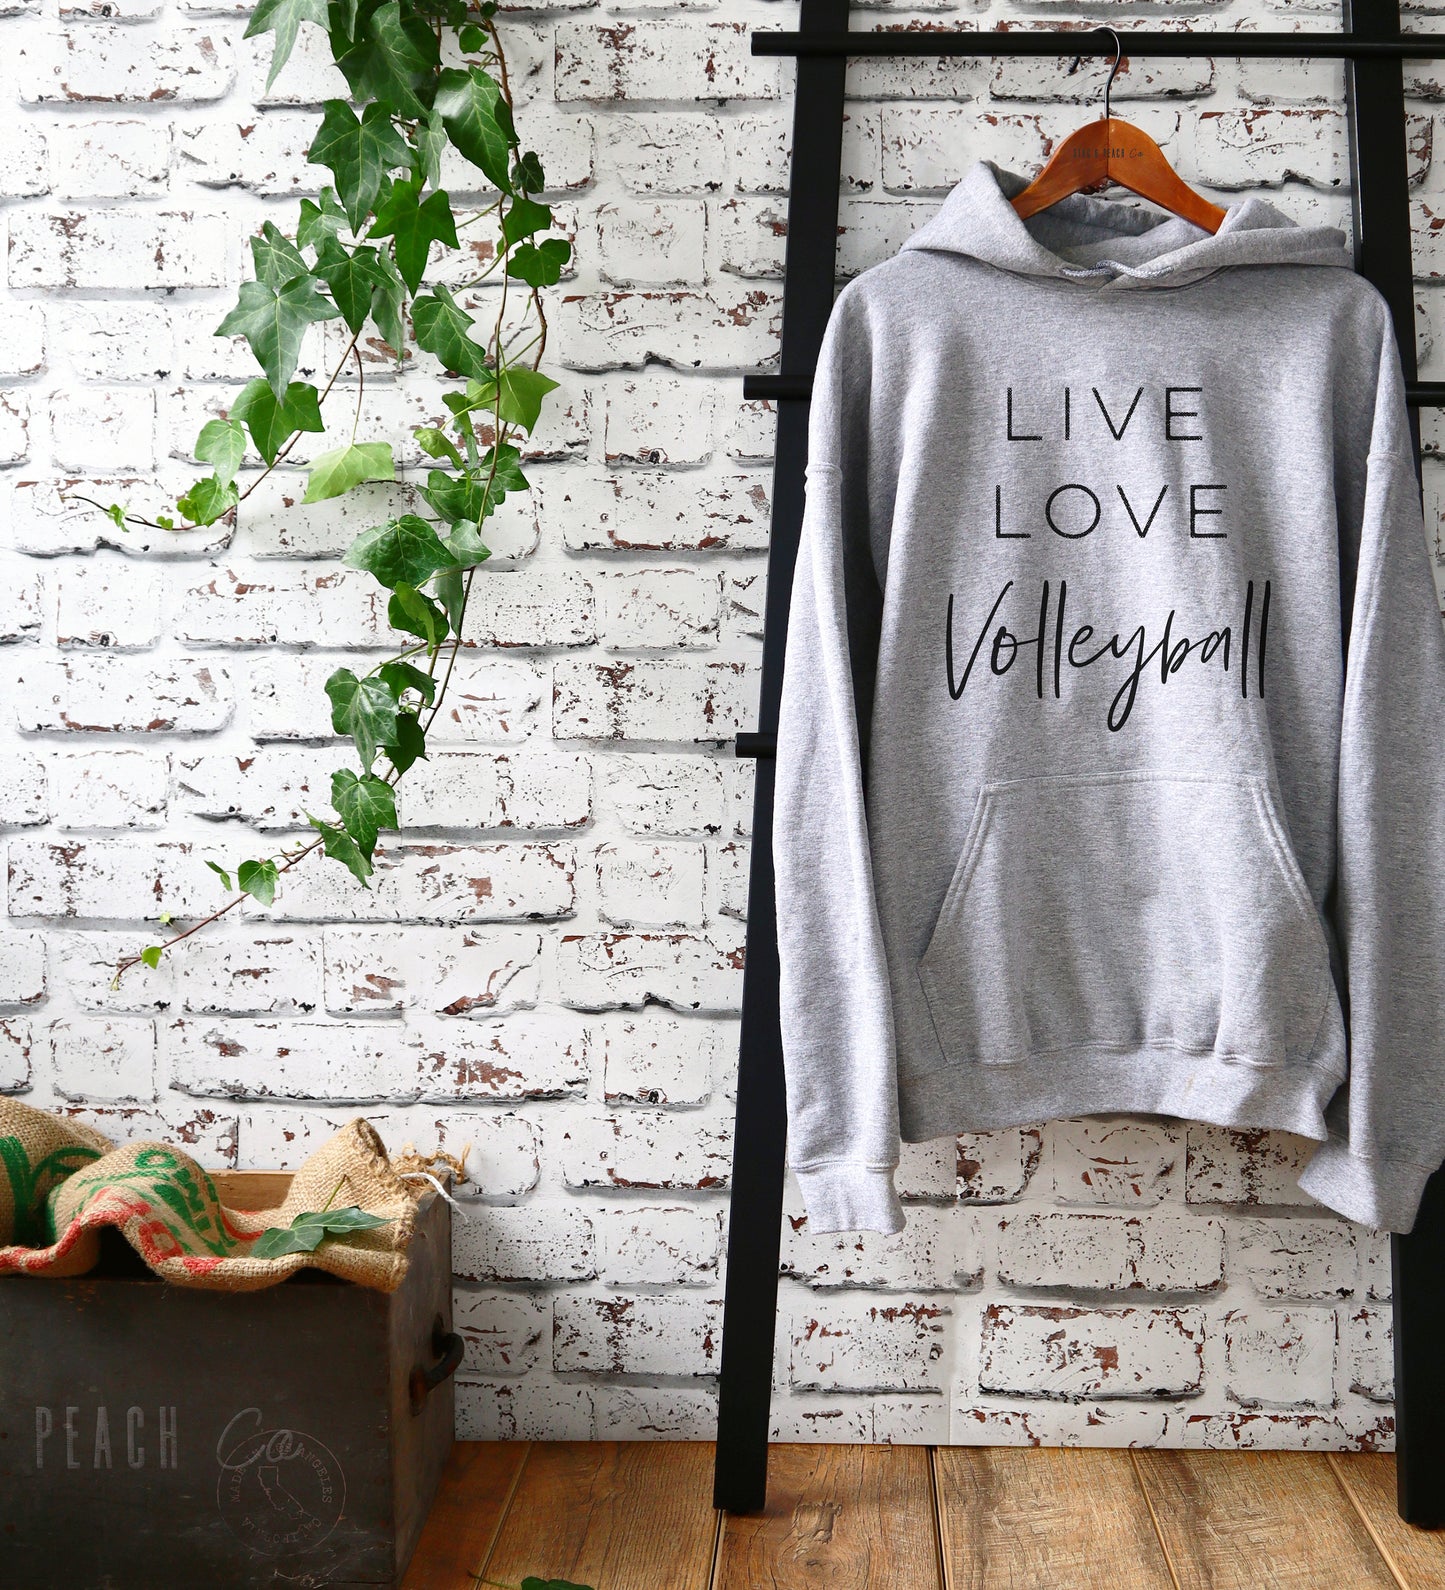 Live Love Volleyball Hoodie - Volleyball Shirt, Volleyball Mom Shirt, Volleyball gift, Volleyball team, Volleyball player, Volleyball Coach